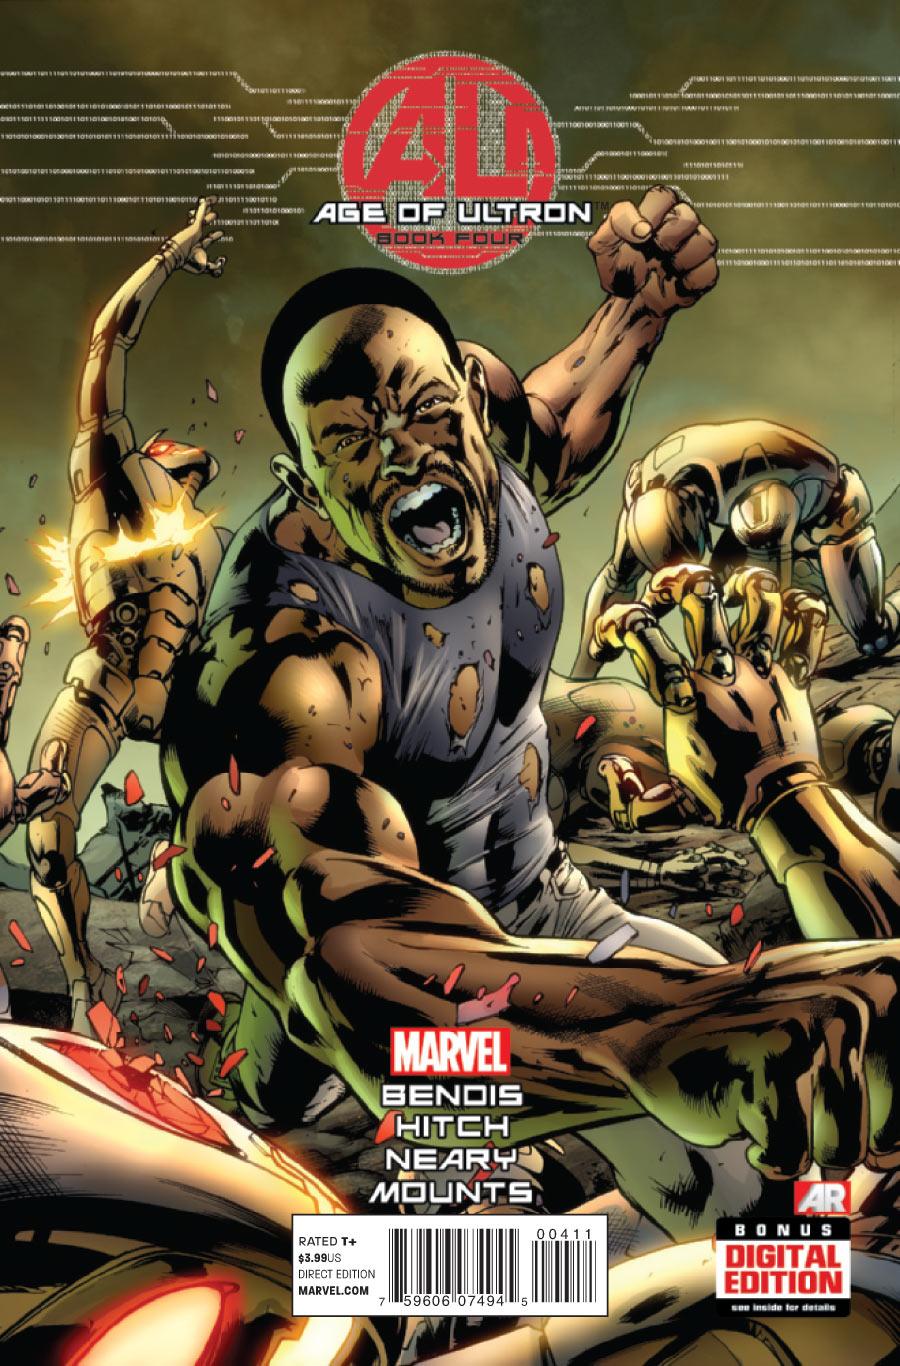 Age of Ultron Vol. 1 #4